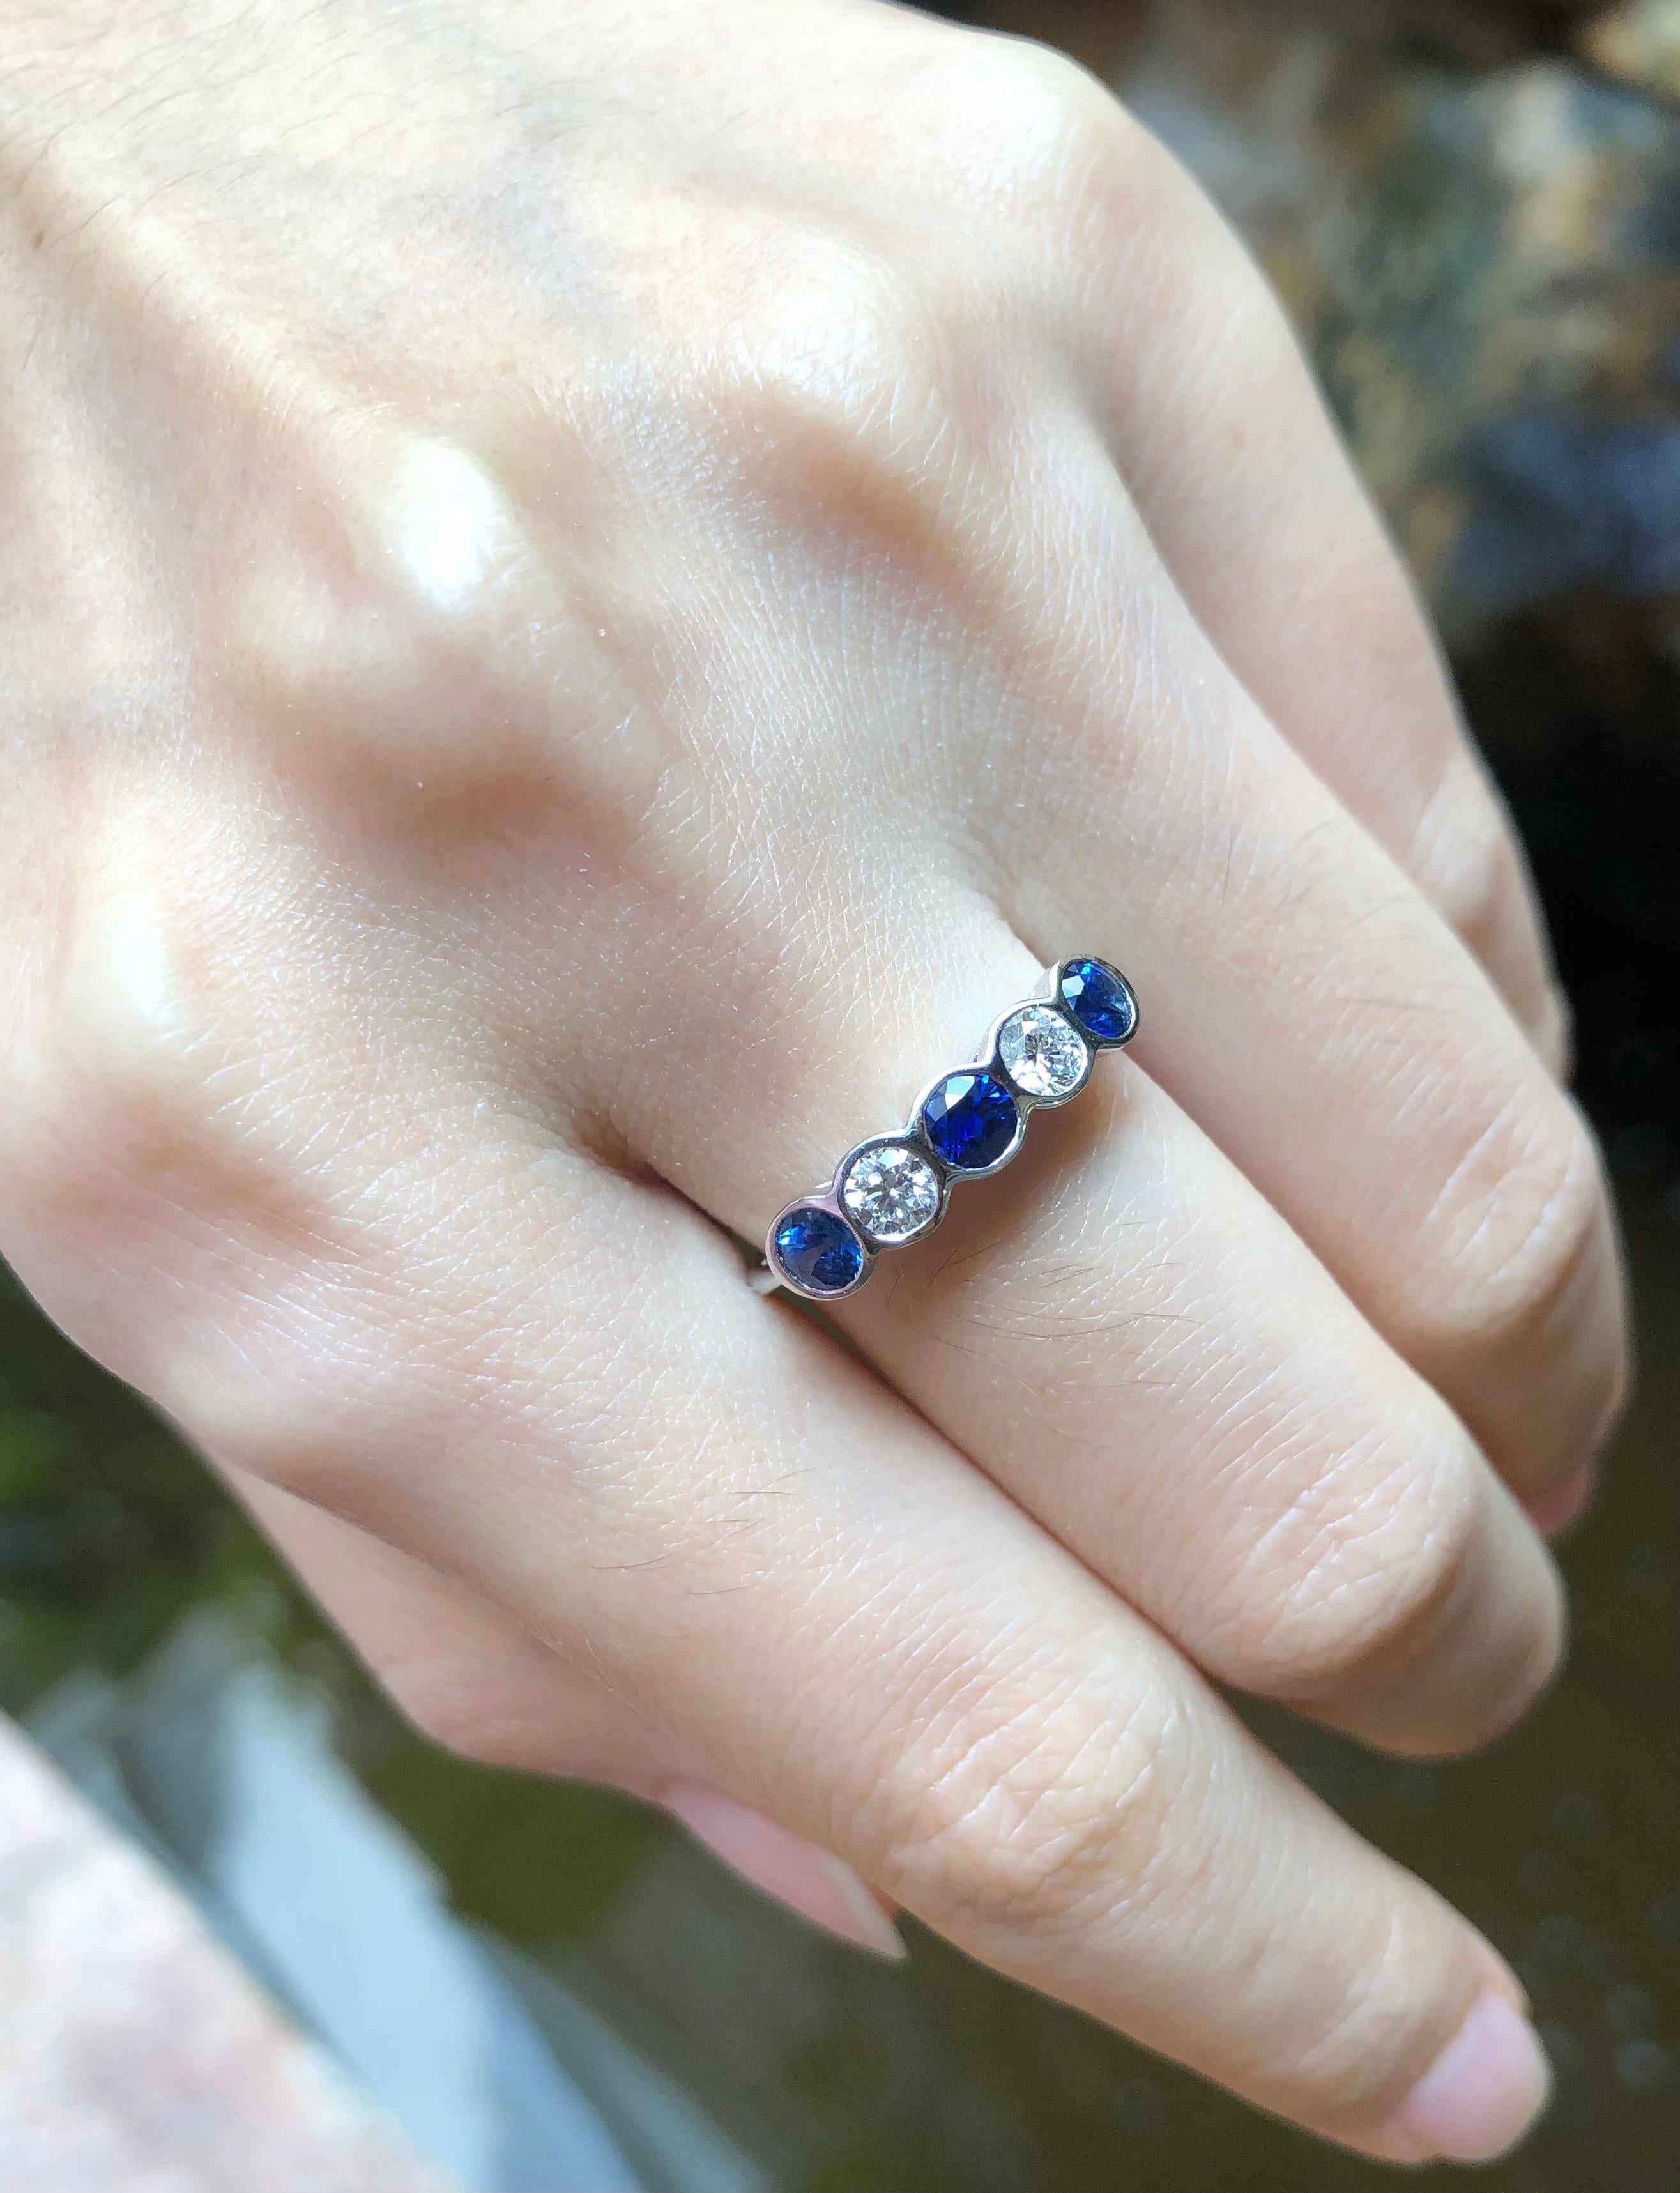 Round Cut Blue Sapphire with Diamond Ring Set in 18 Karat White Gold Settings For Sale